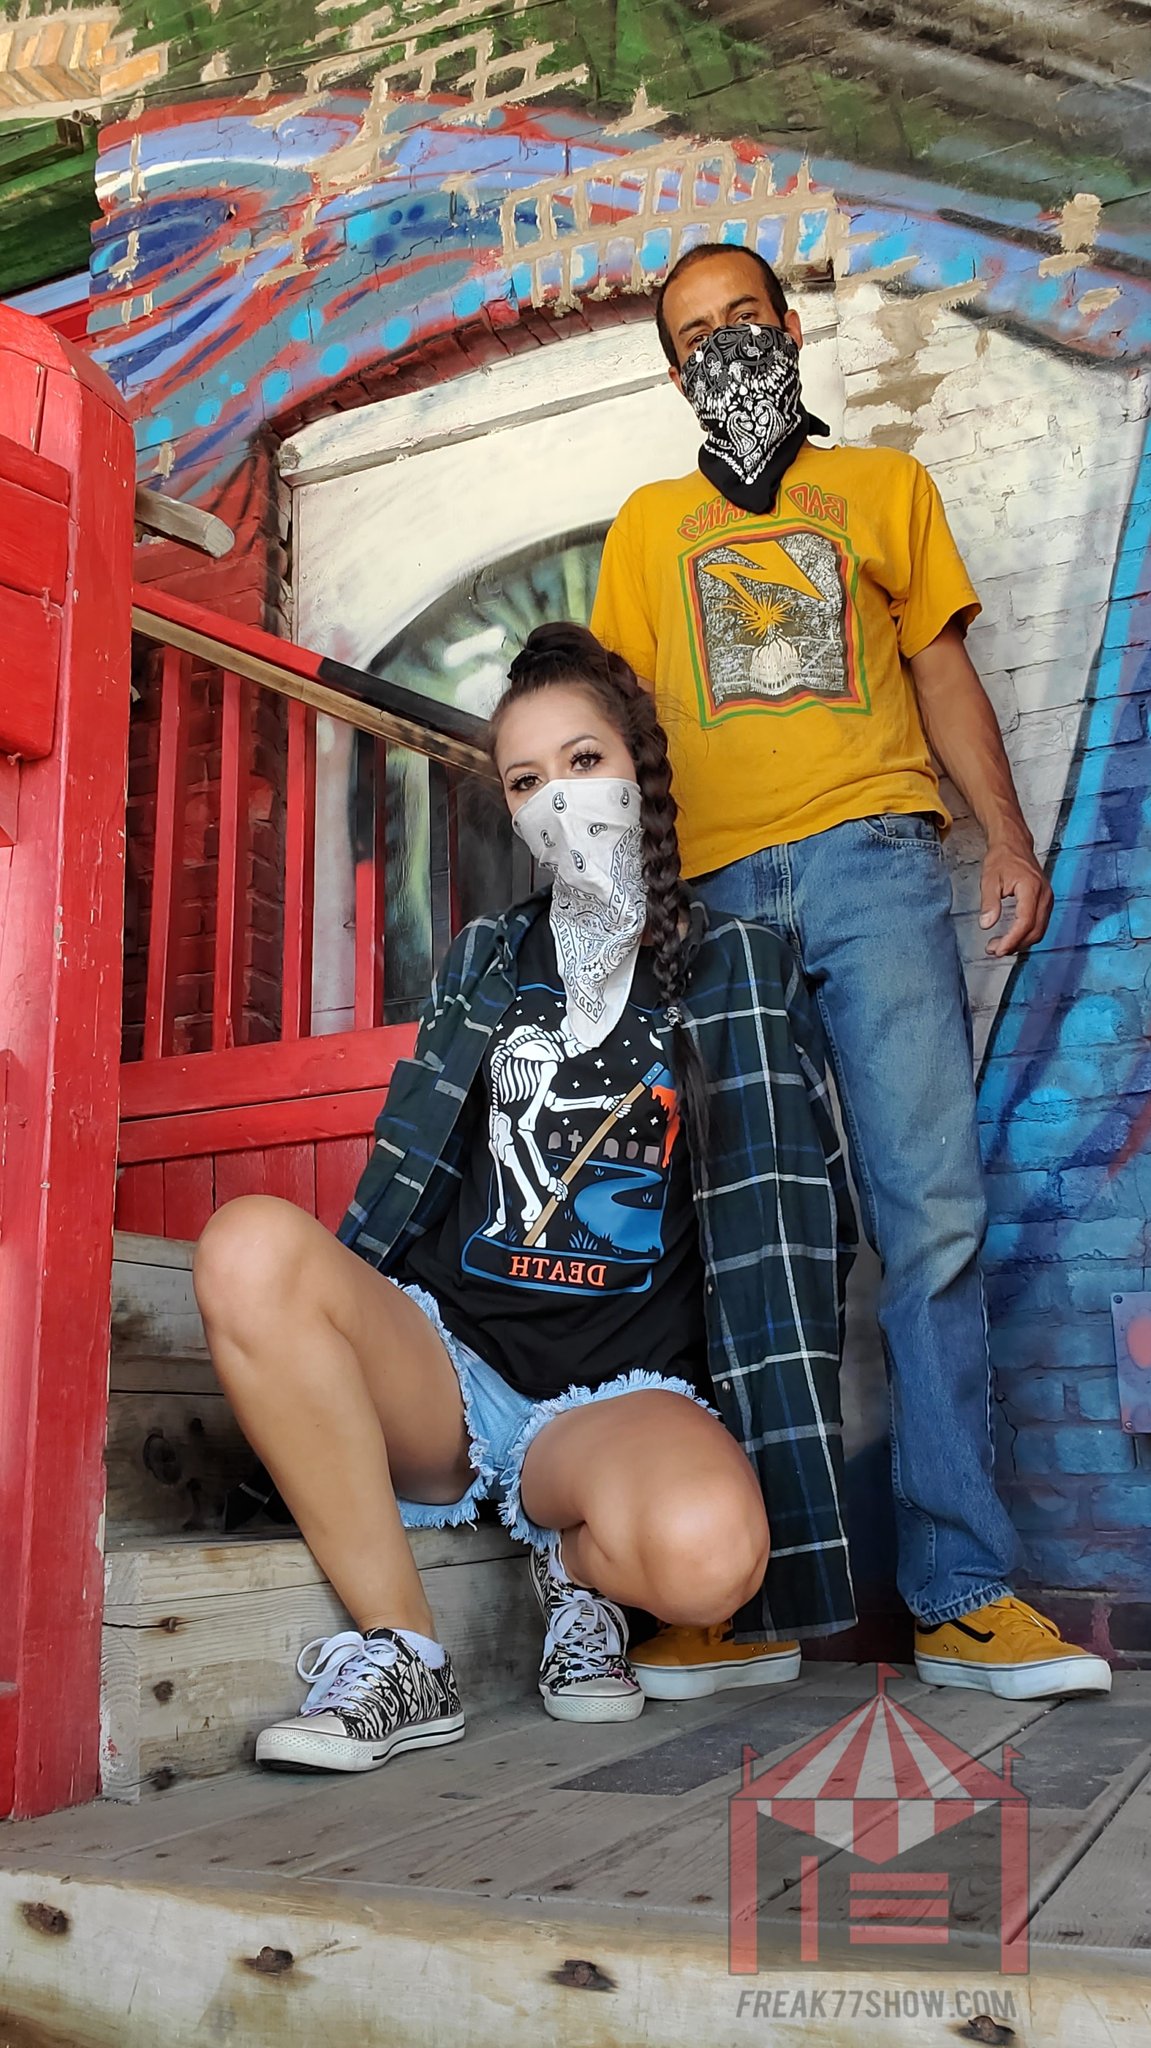 X 上的🎪Freak77Show：「Don't fuck with us we run this bitch  🎪t.coqG5p1QJwV7🎪 #camcouple #couplegoals #staysafe  t.cod2zfe1oFp9」  X